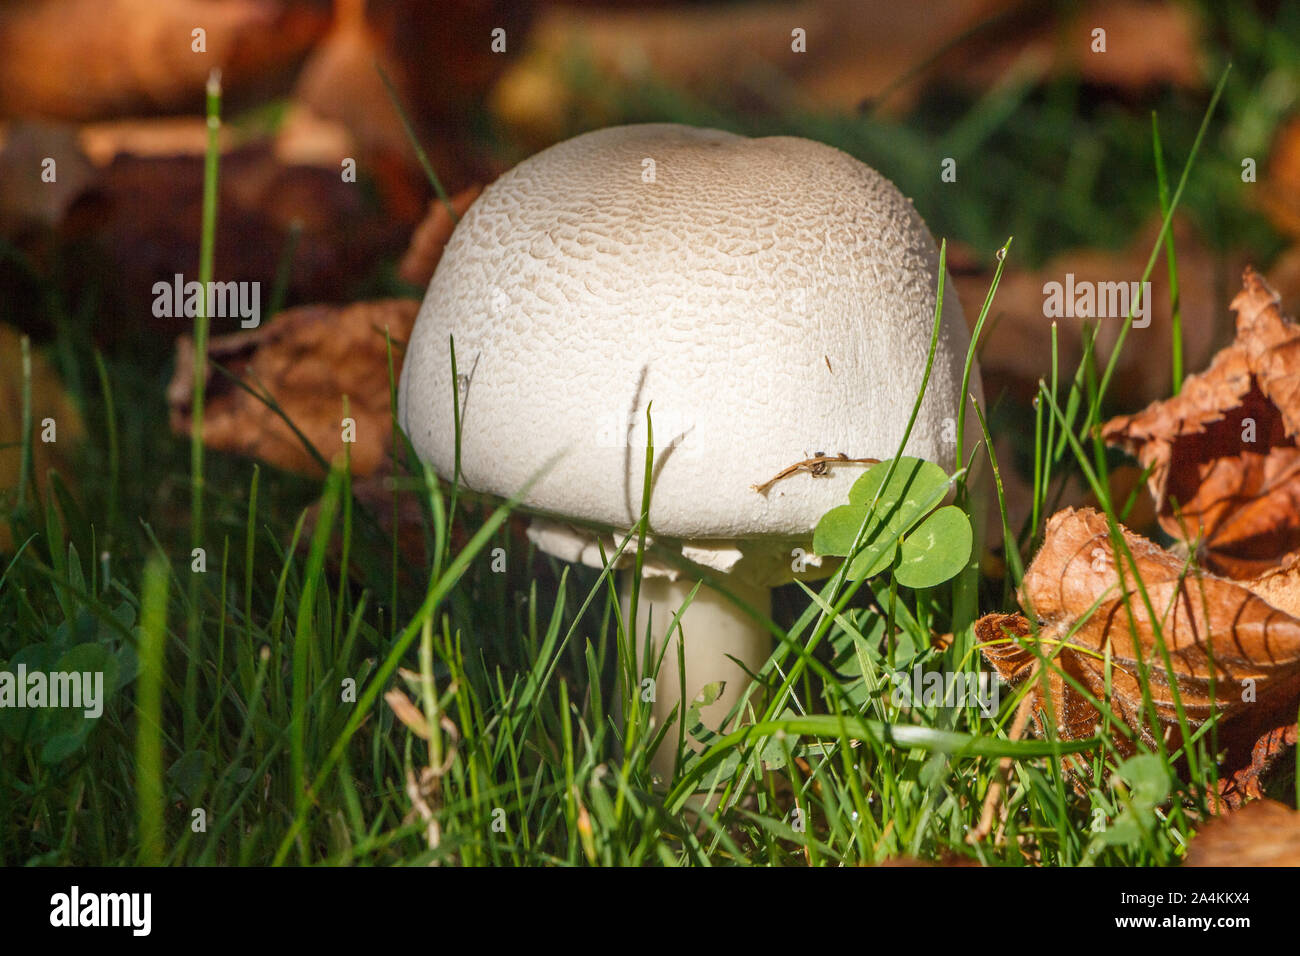 Field mushroom and dead leaves in grass during spring Stock Photo